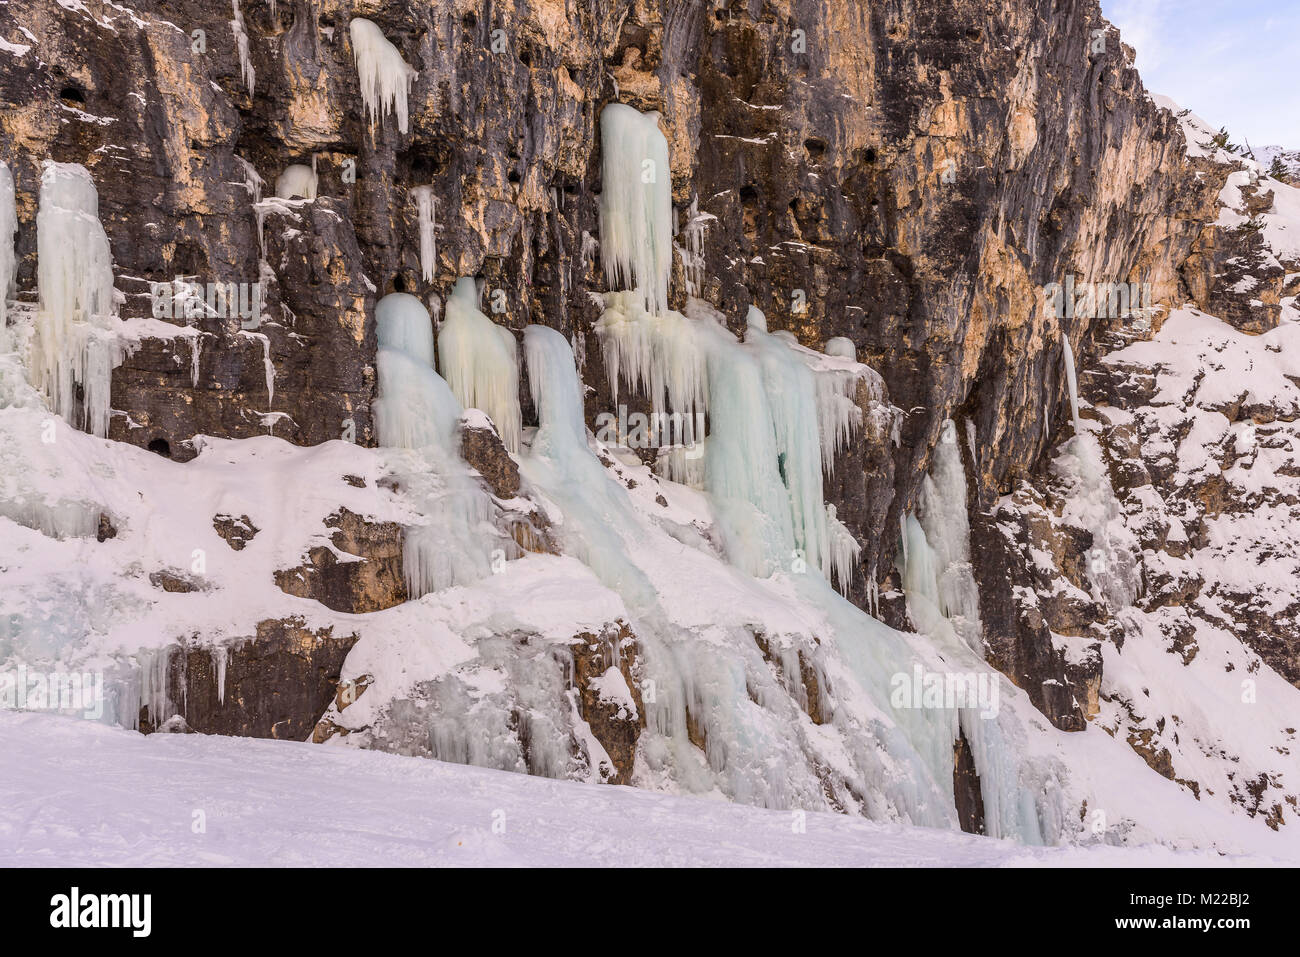 Winter view of an icefall along the slope of Lagazuoi in the Dolomites Stock Photo